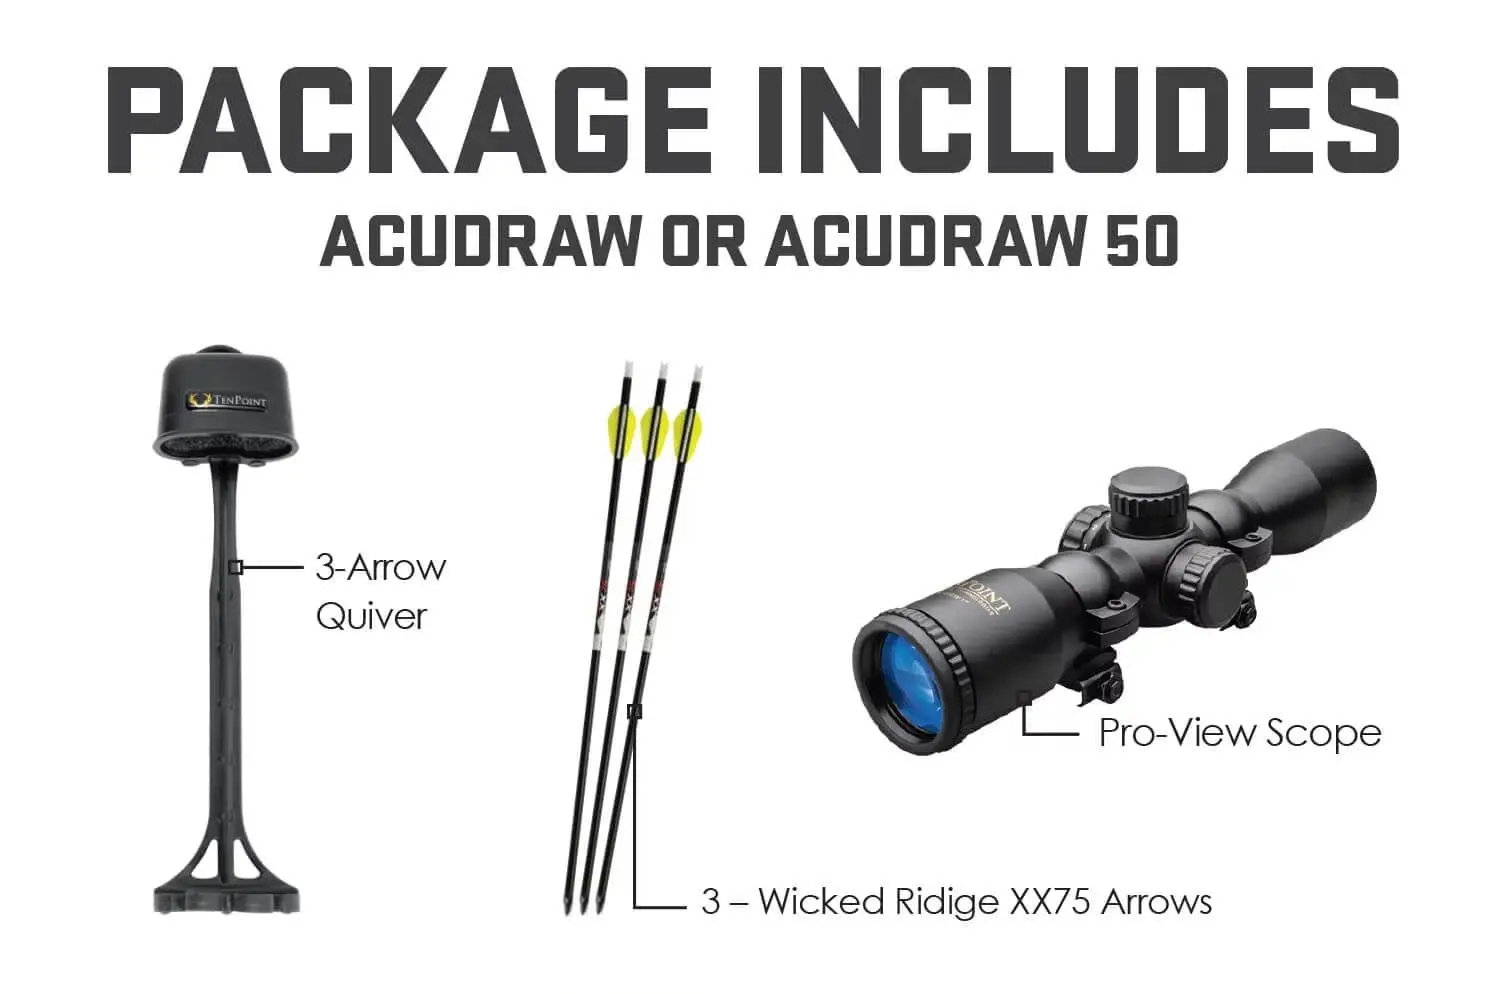 Wicked ridge invader 400 crossbow package